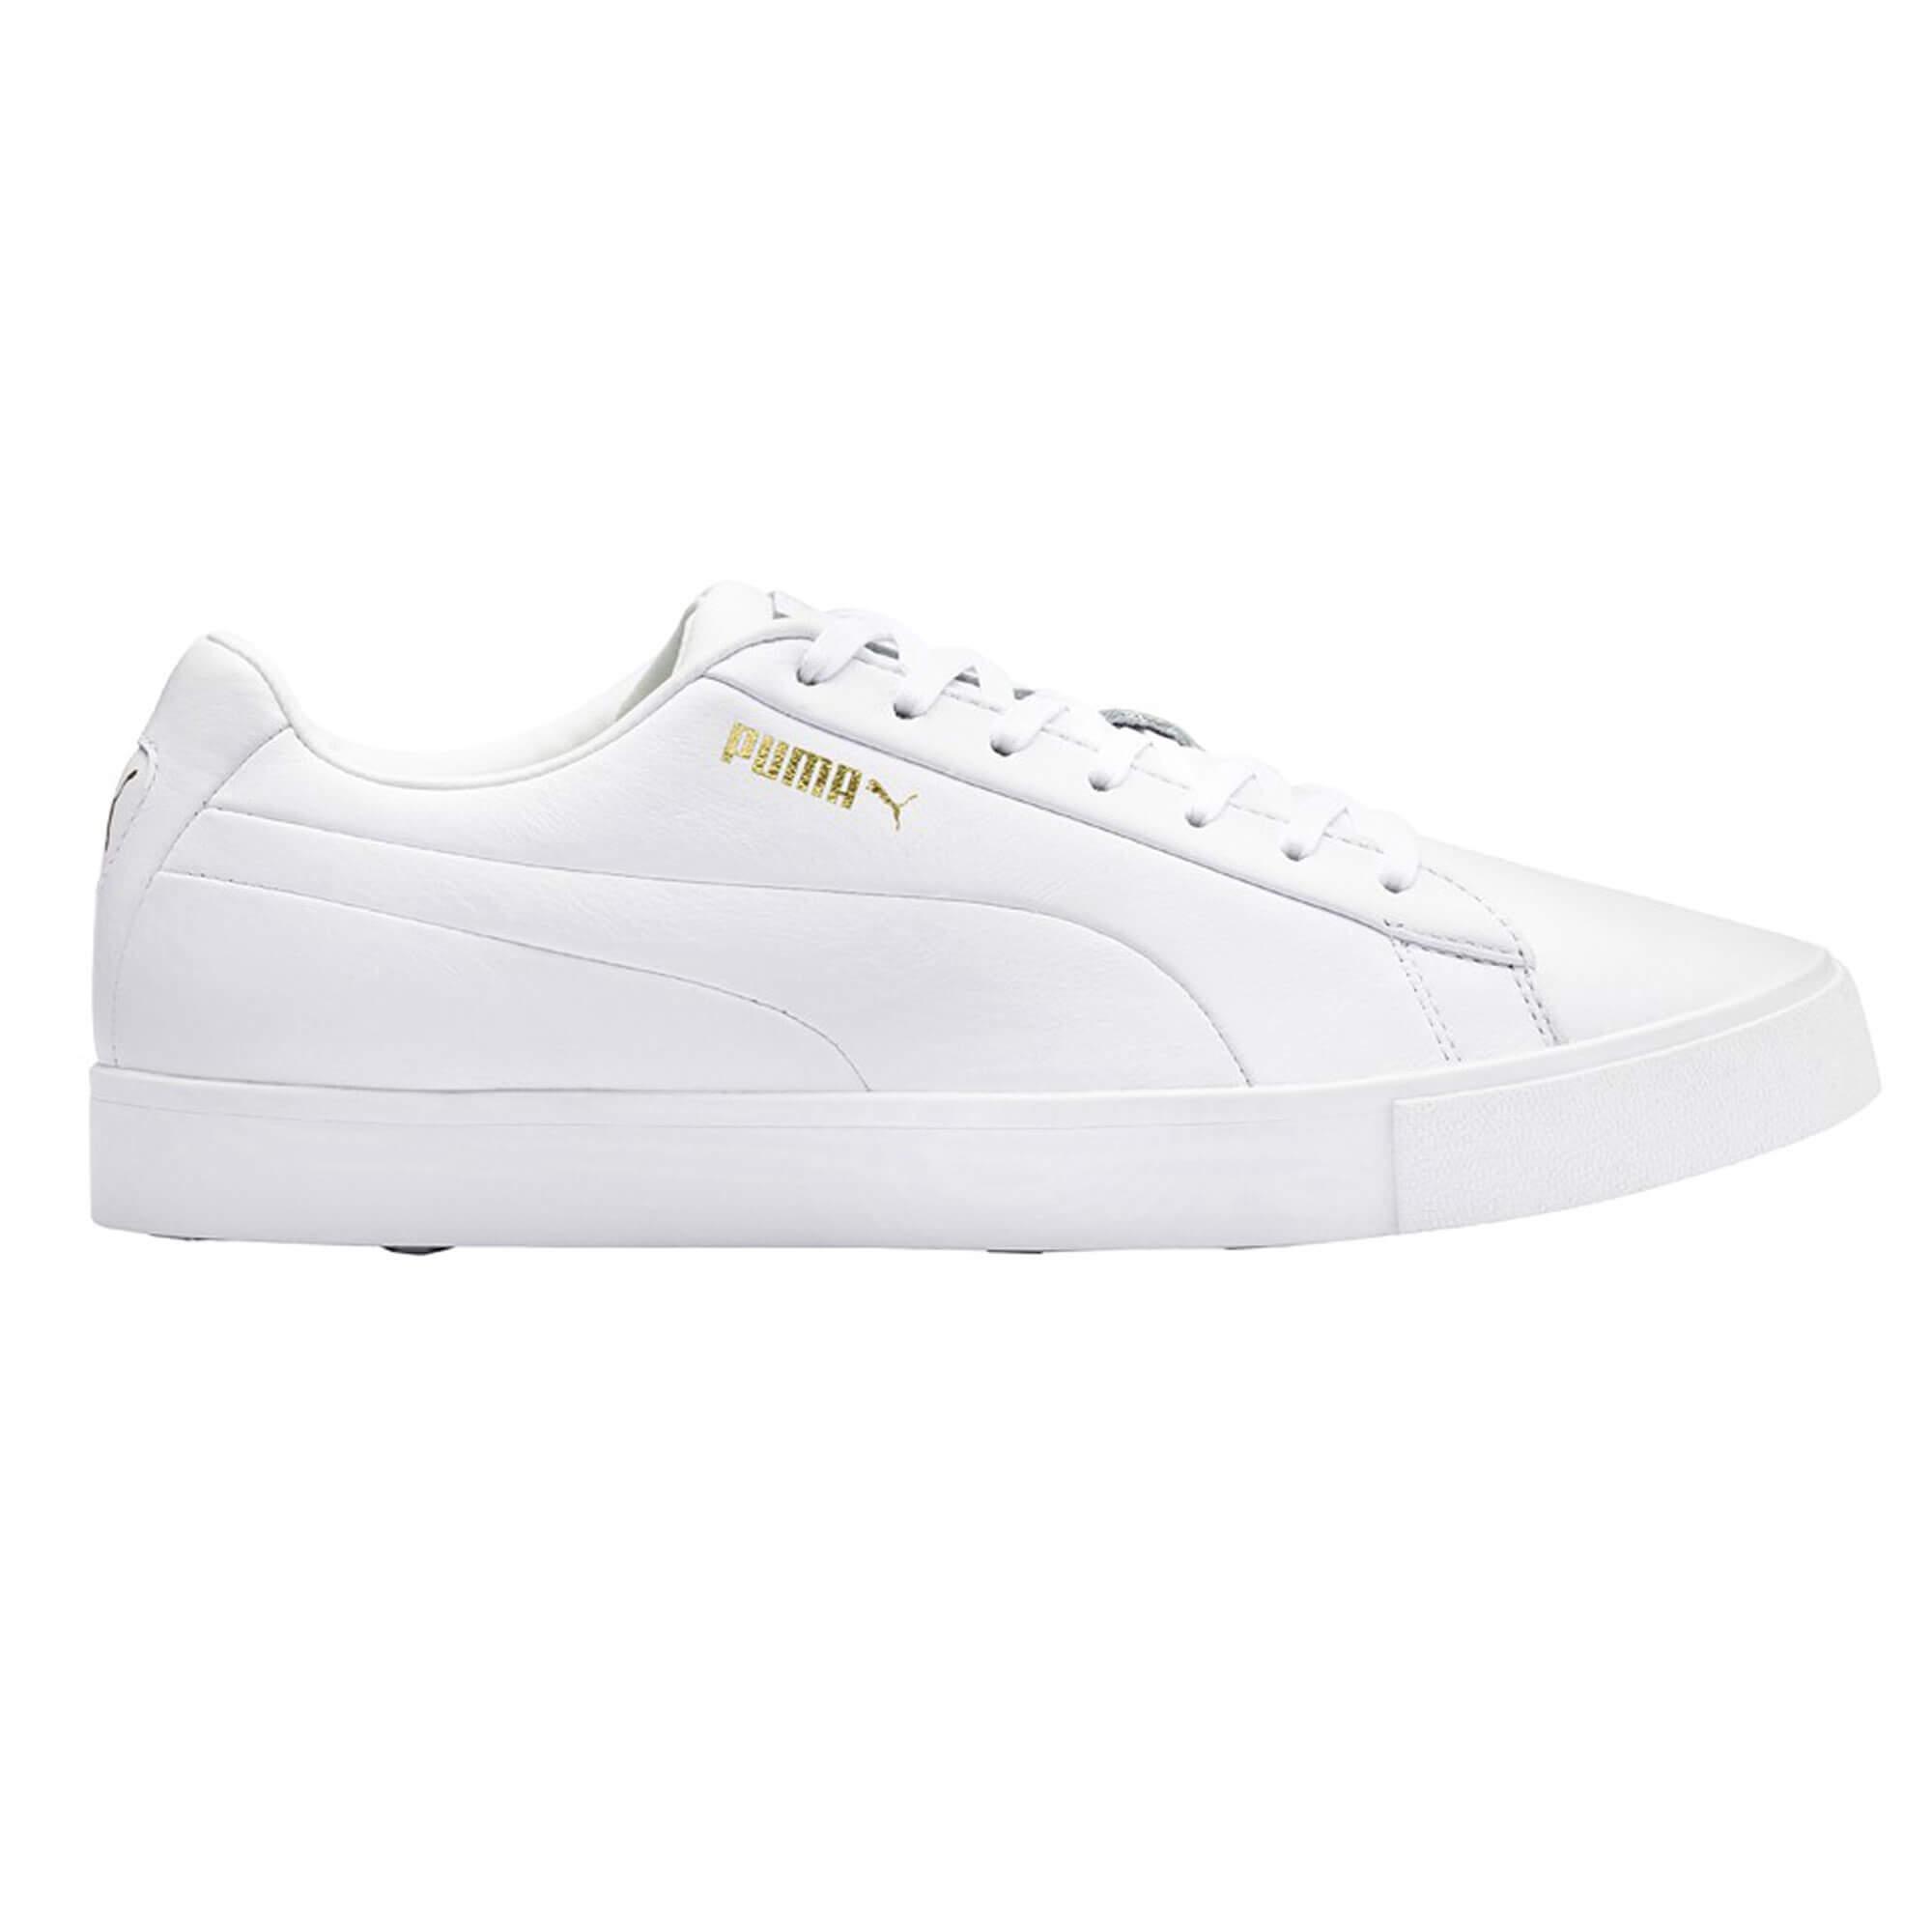 puma shoes white and gold